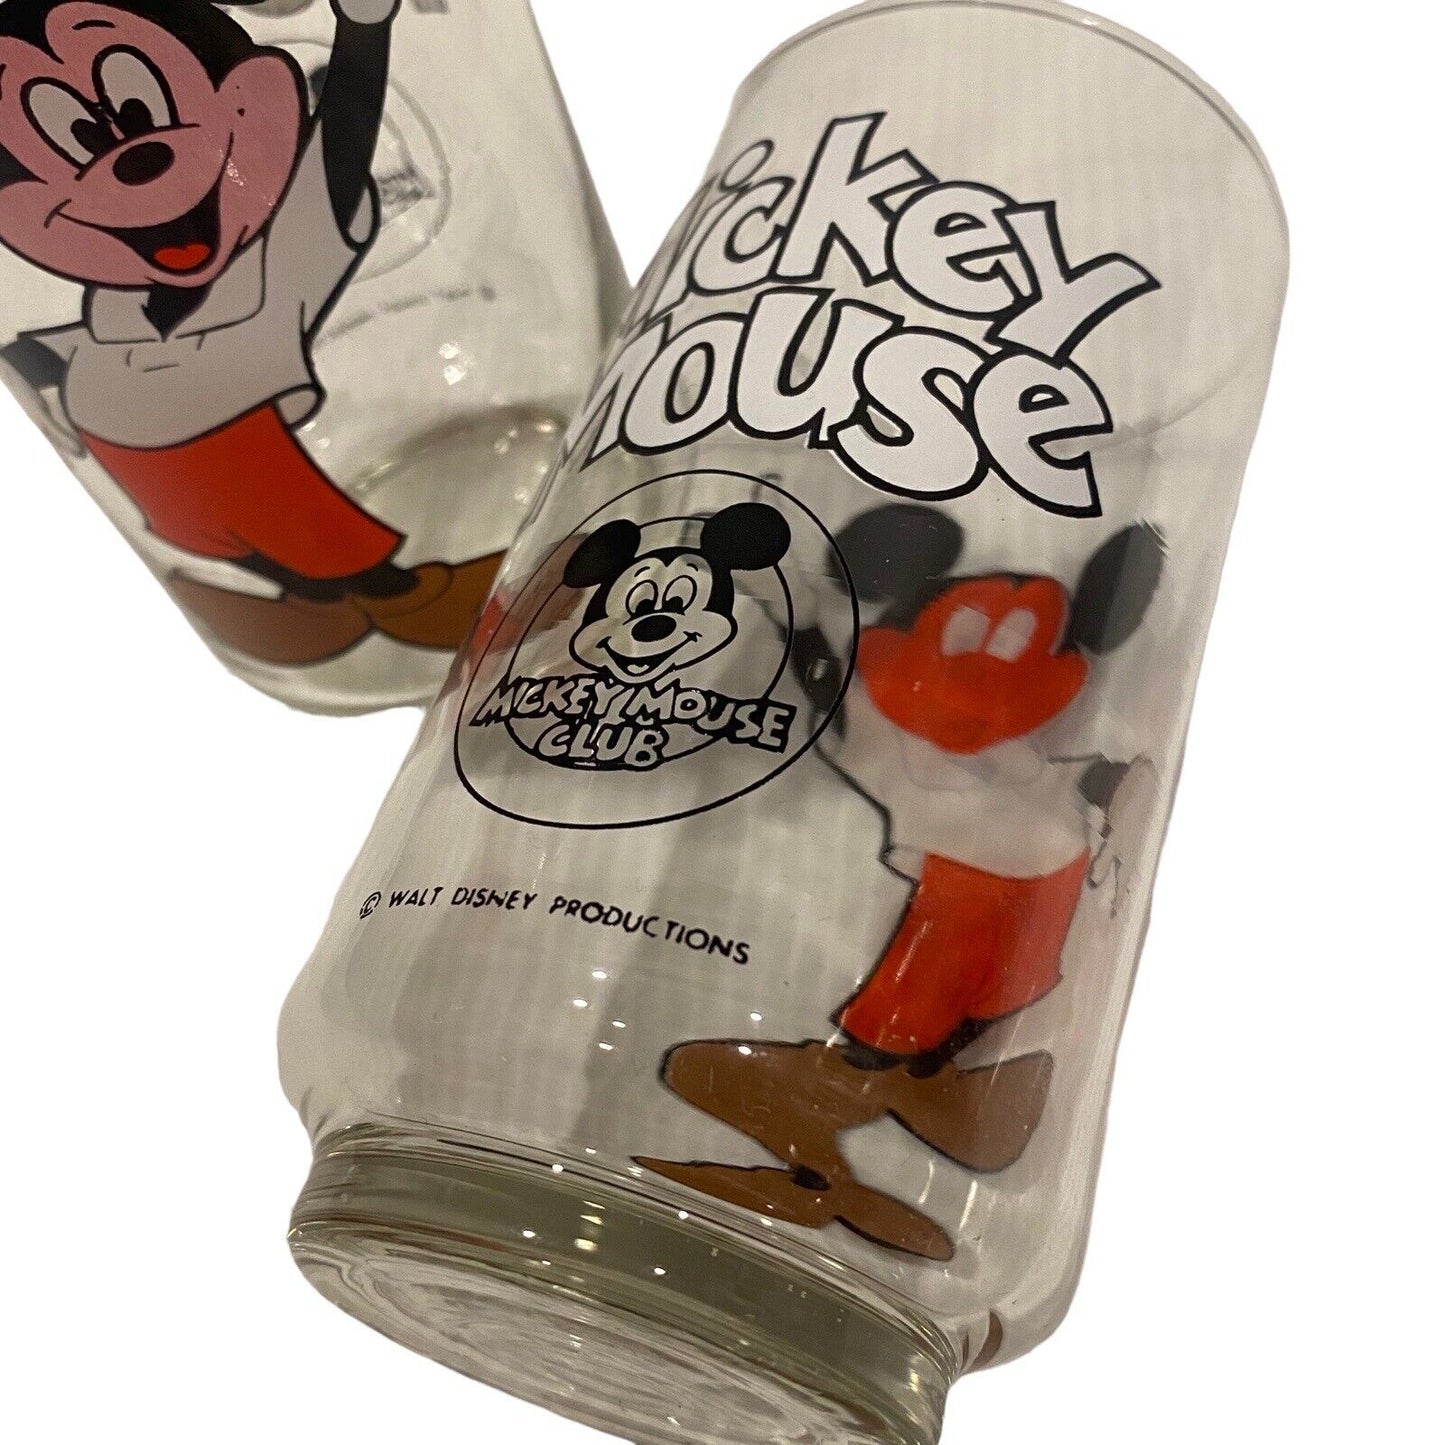 Vtg 1980s Disney Mickey Mouse Club Juice Glasses Clear Drinking Glass 12oz